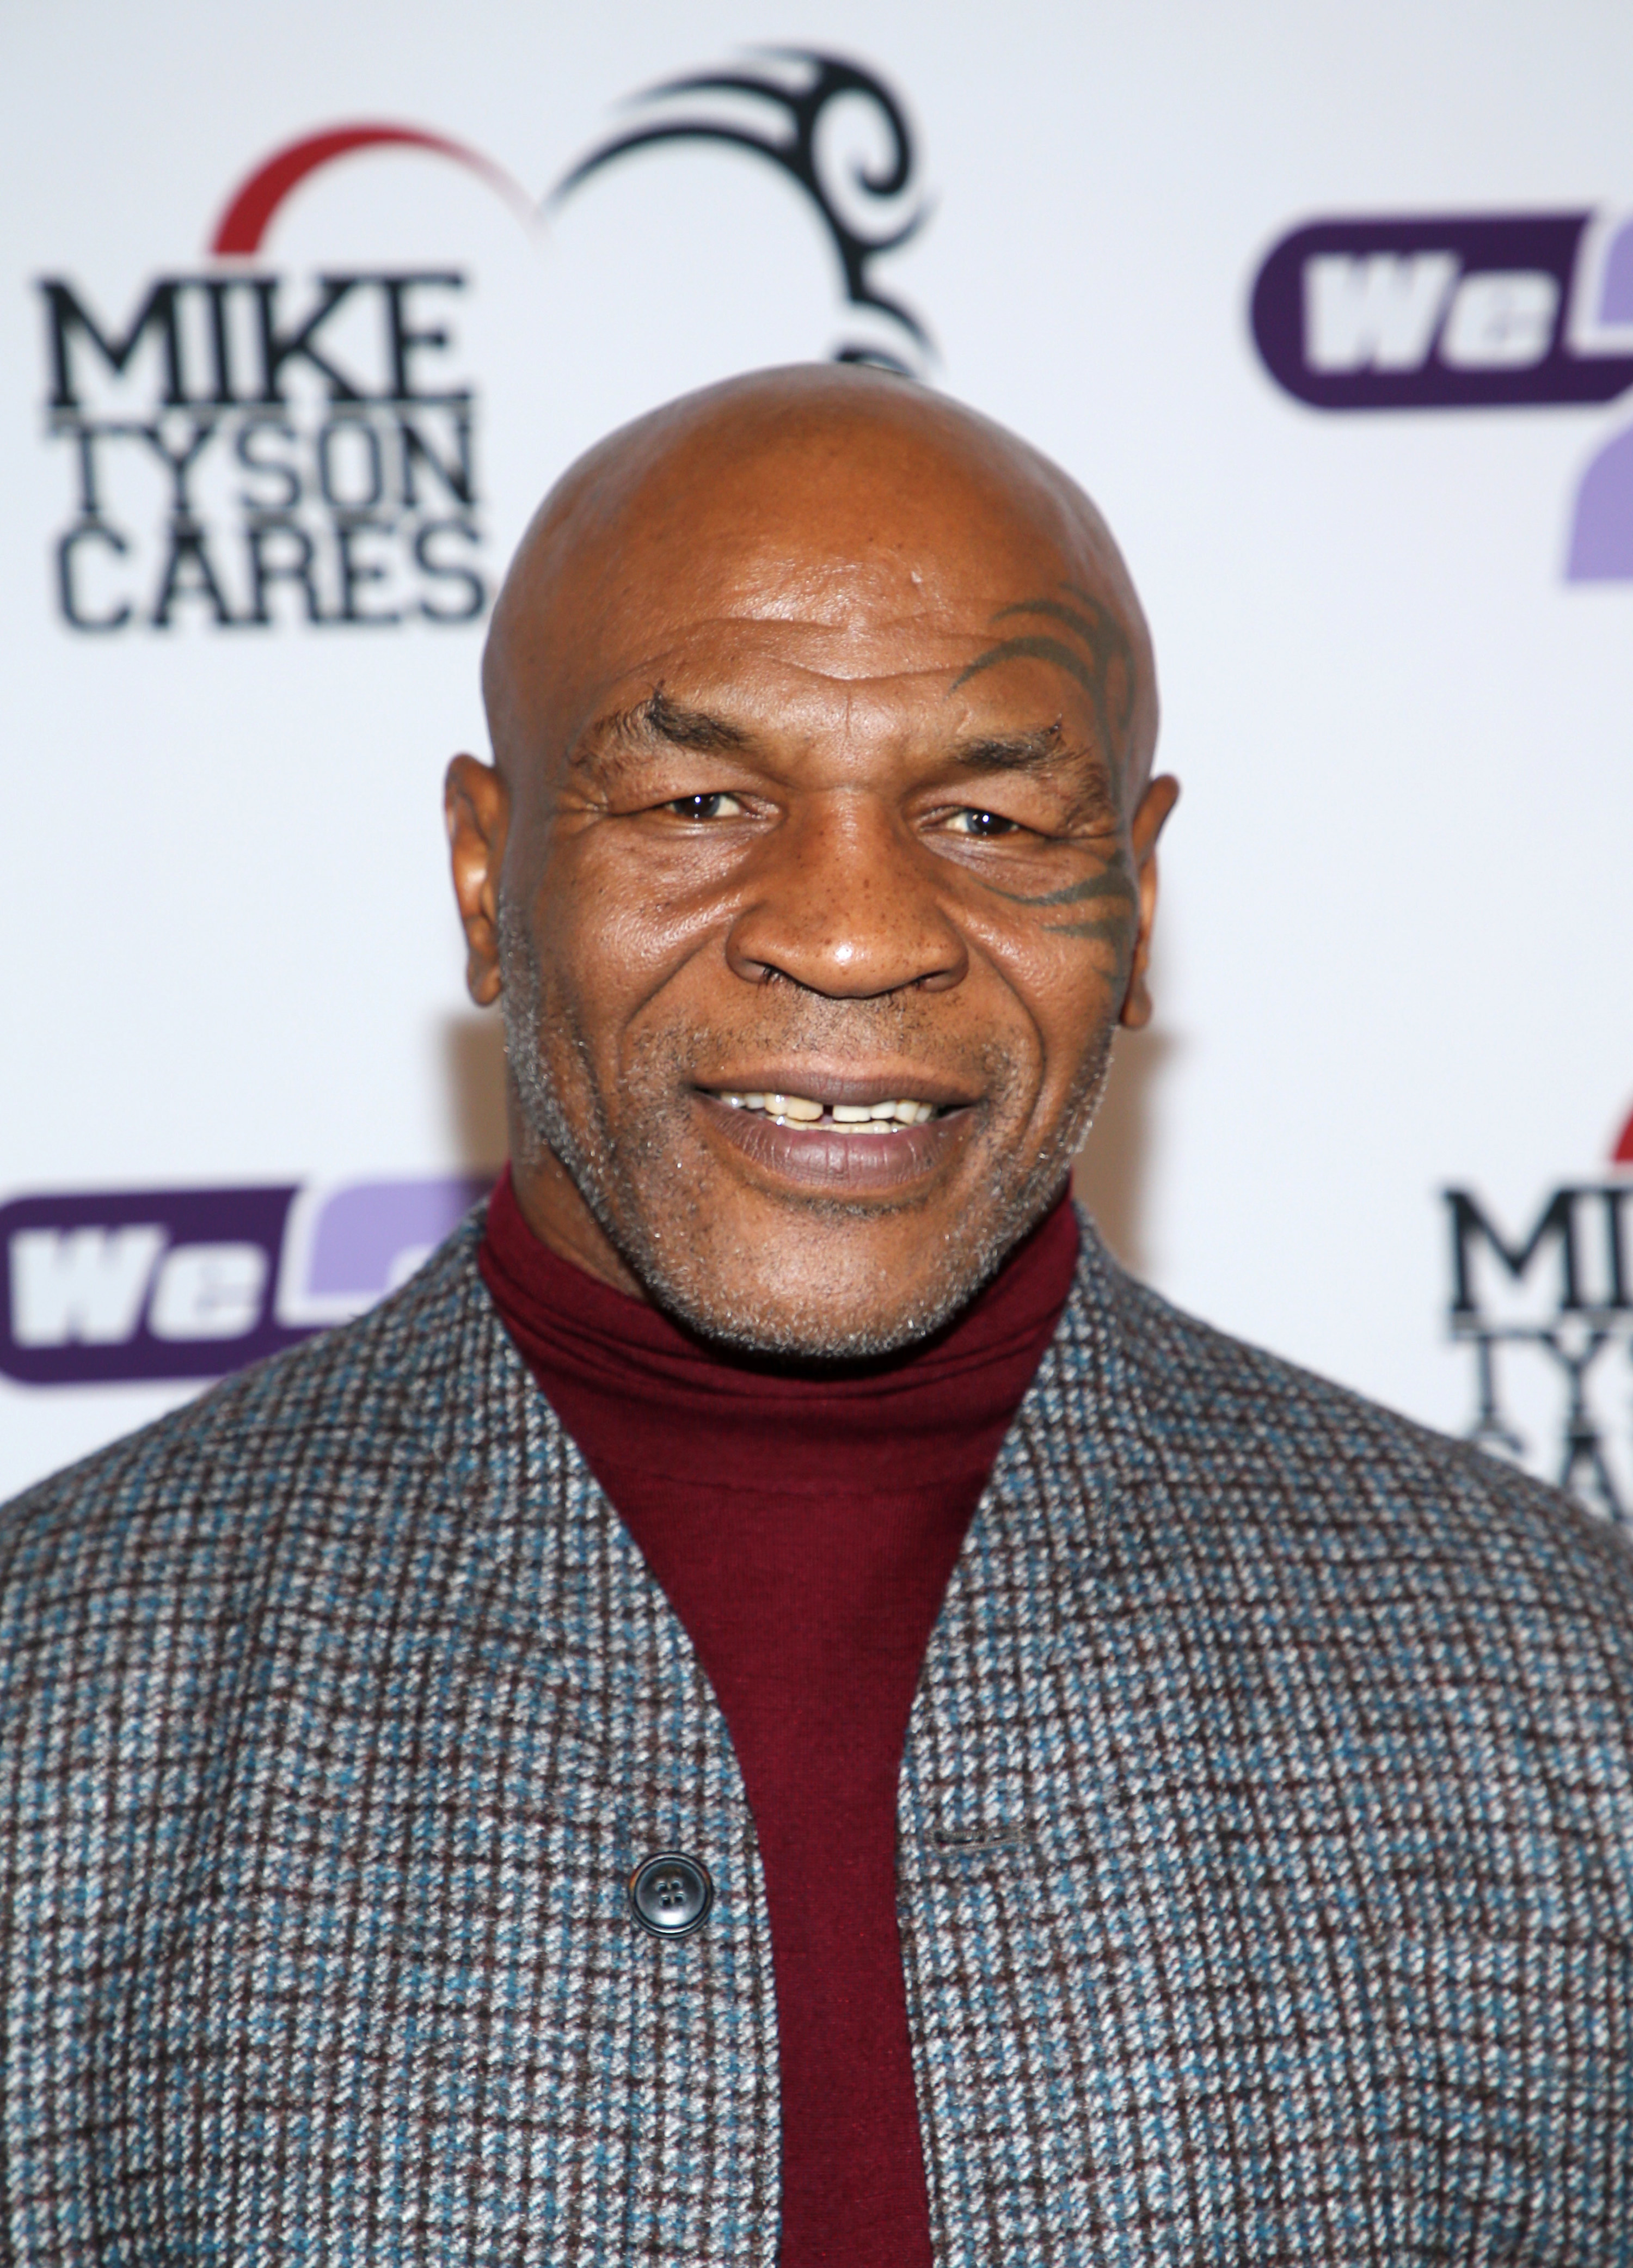 Mike Tyson smiling on a red carpet